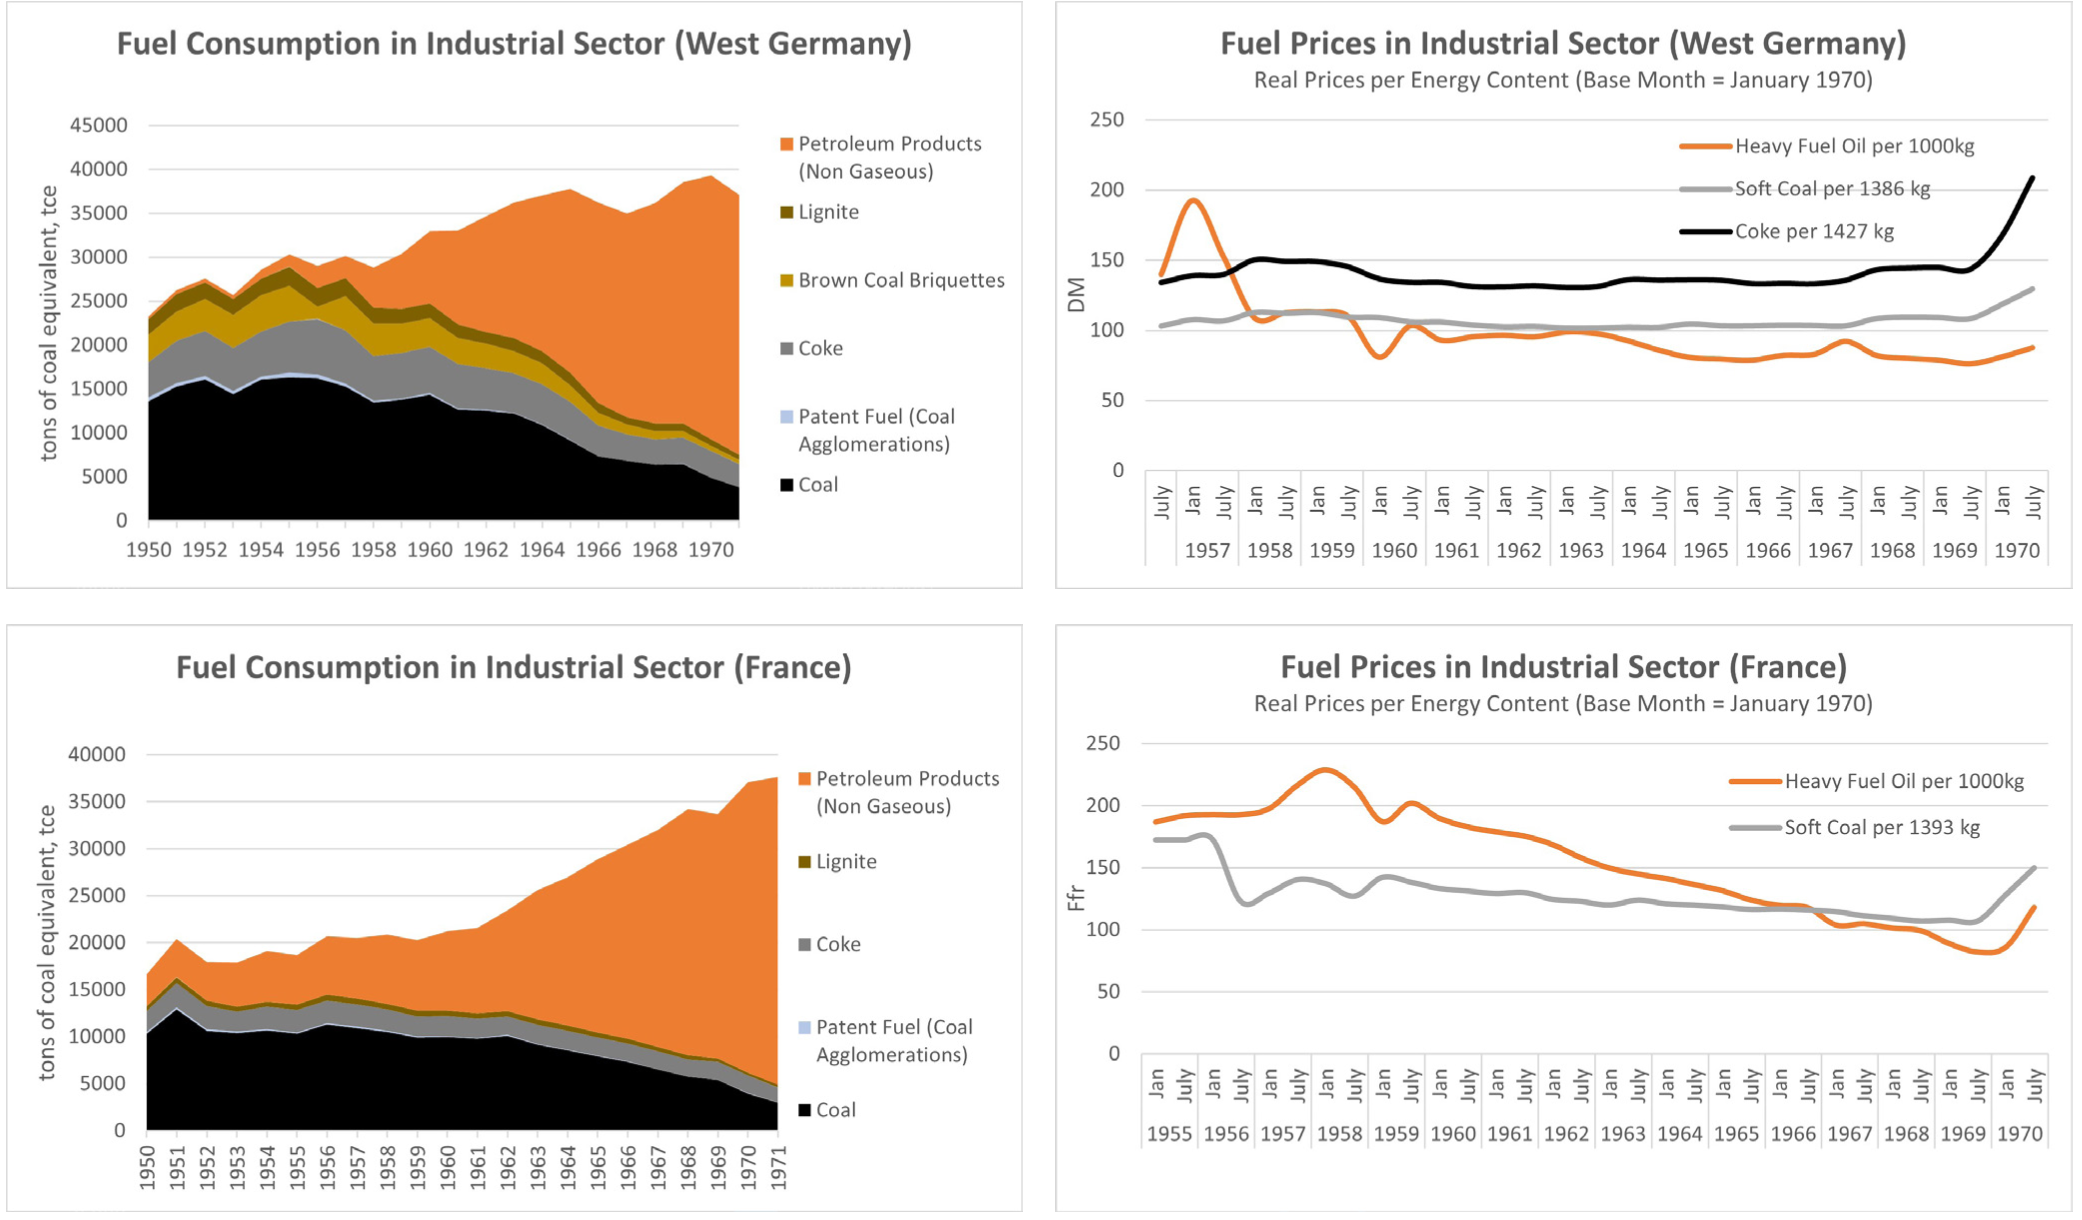 Figure 4: Consumption and Real Prices of Oil and Coal Products per Energy Content in France and West Germany (Industrial Sector). Source: Statistical Office of the European Communities, A Comparison of Fuel Prices 1955-1970 (Luxembourg: Eurostat, 1974).